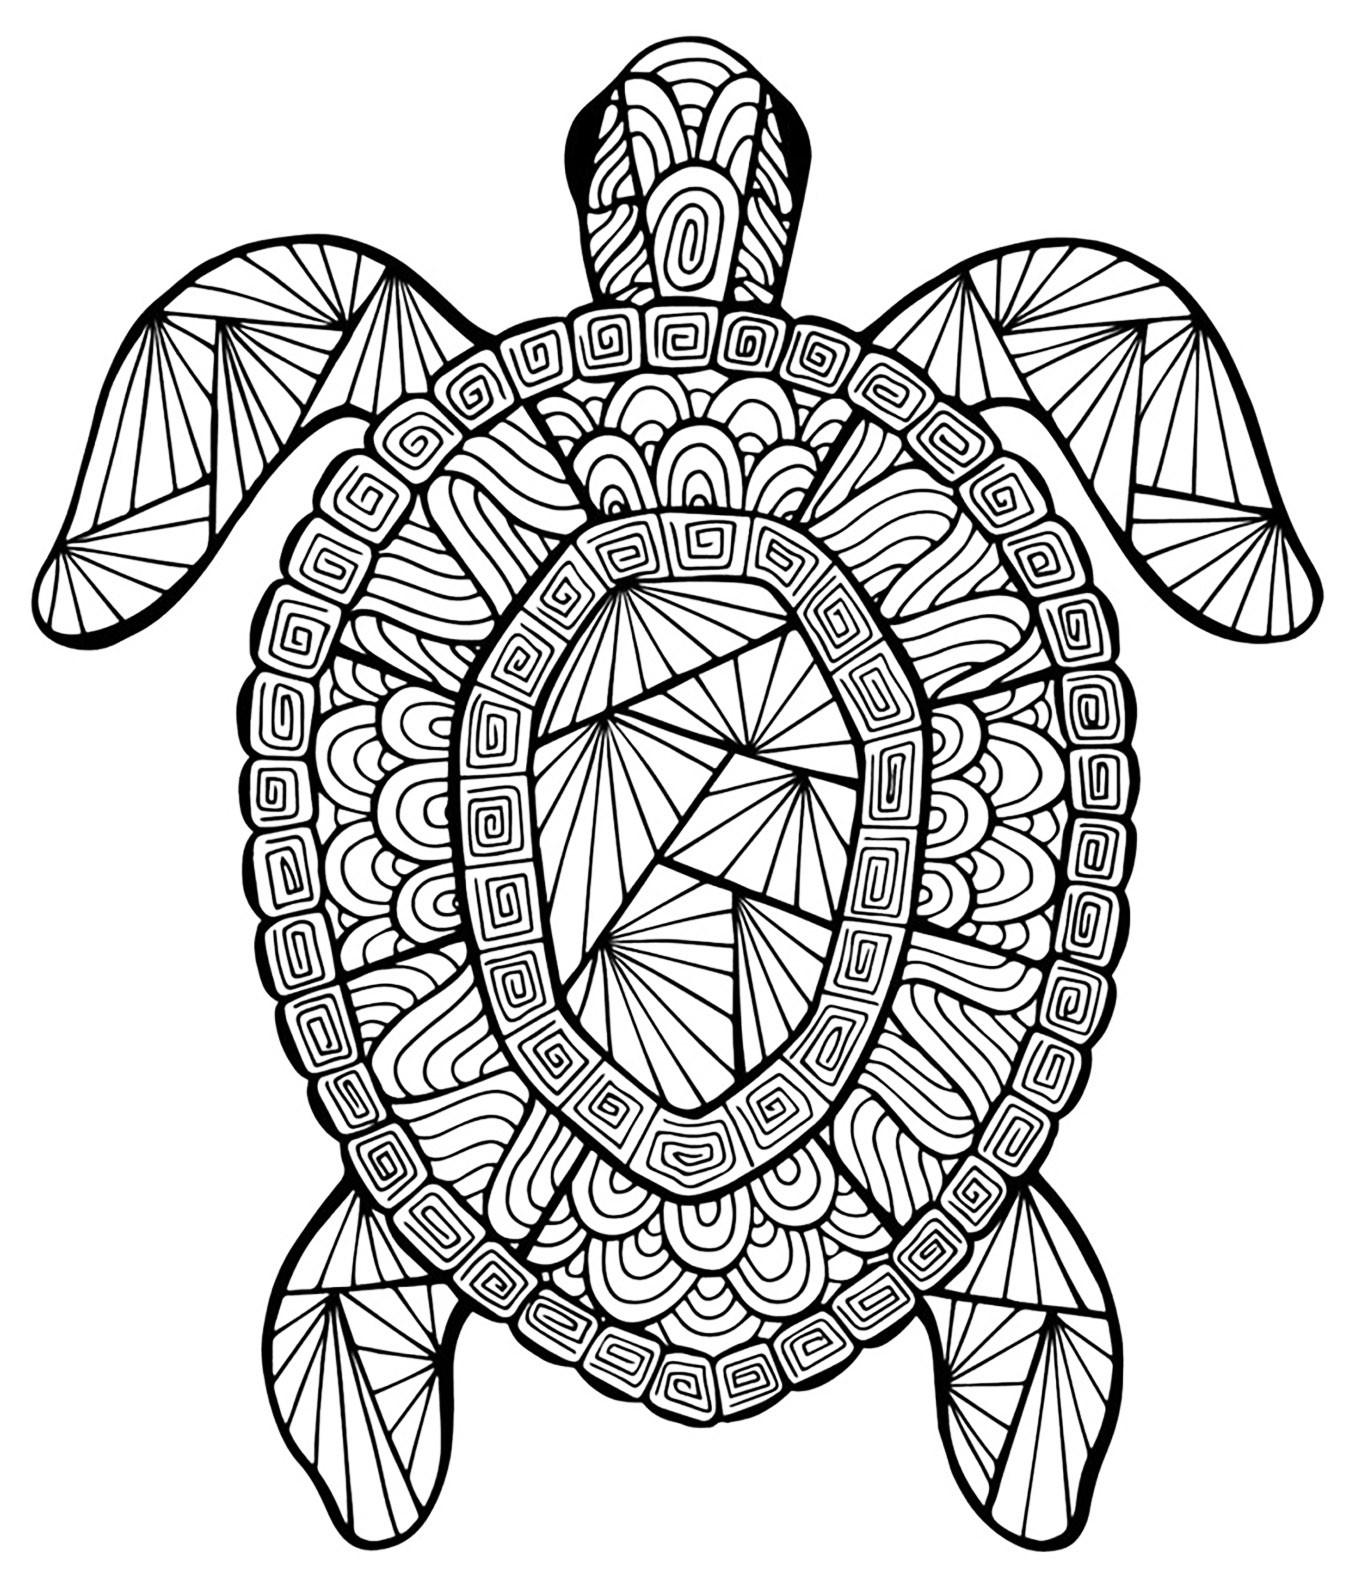 Adult Coloring Pages Turtle
 Incredible turtle Turtles Adult Coloring Pages